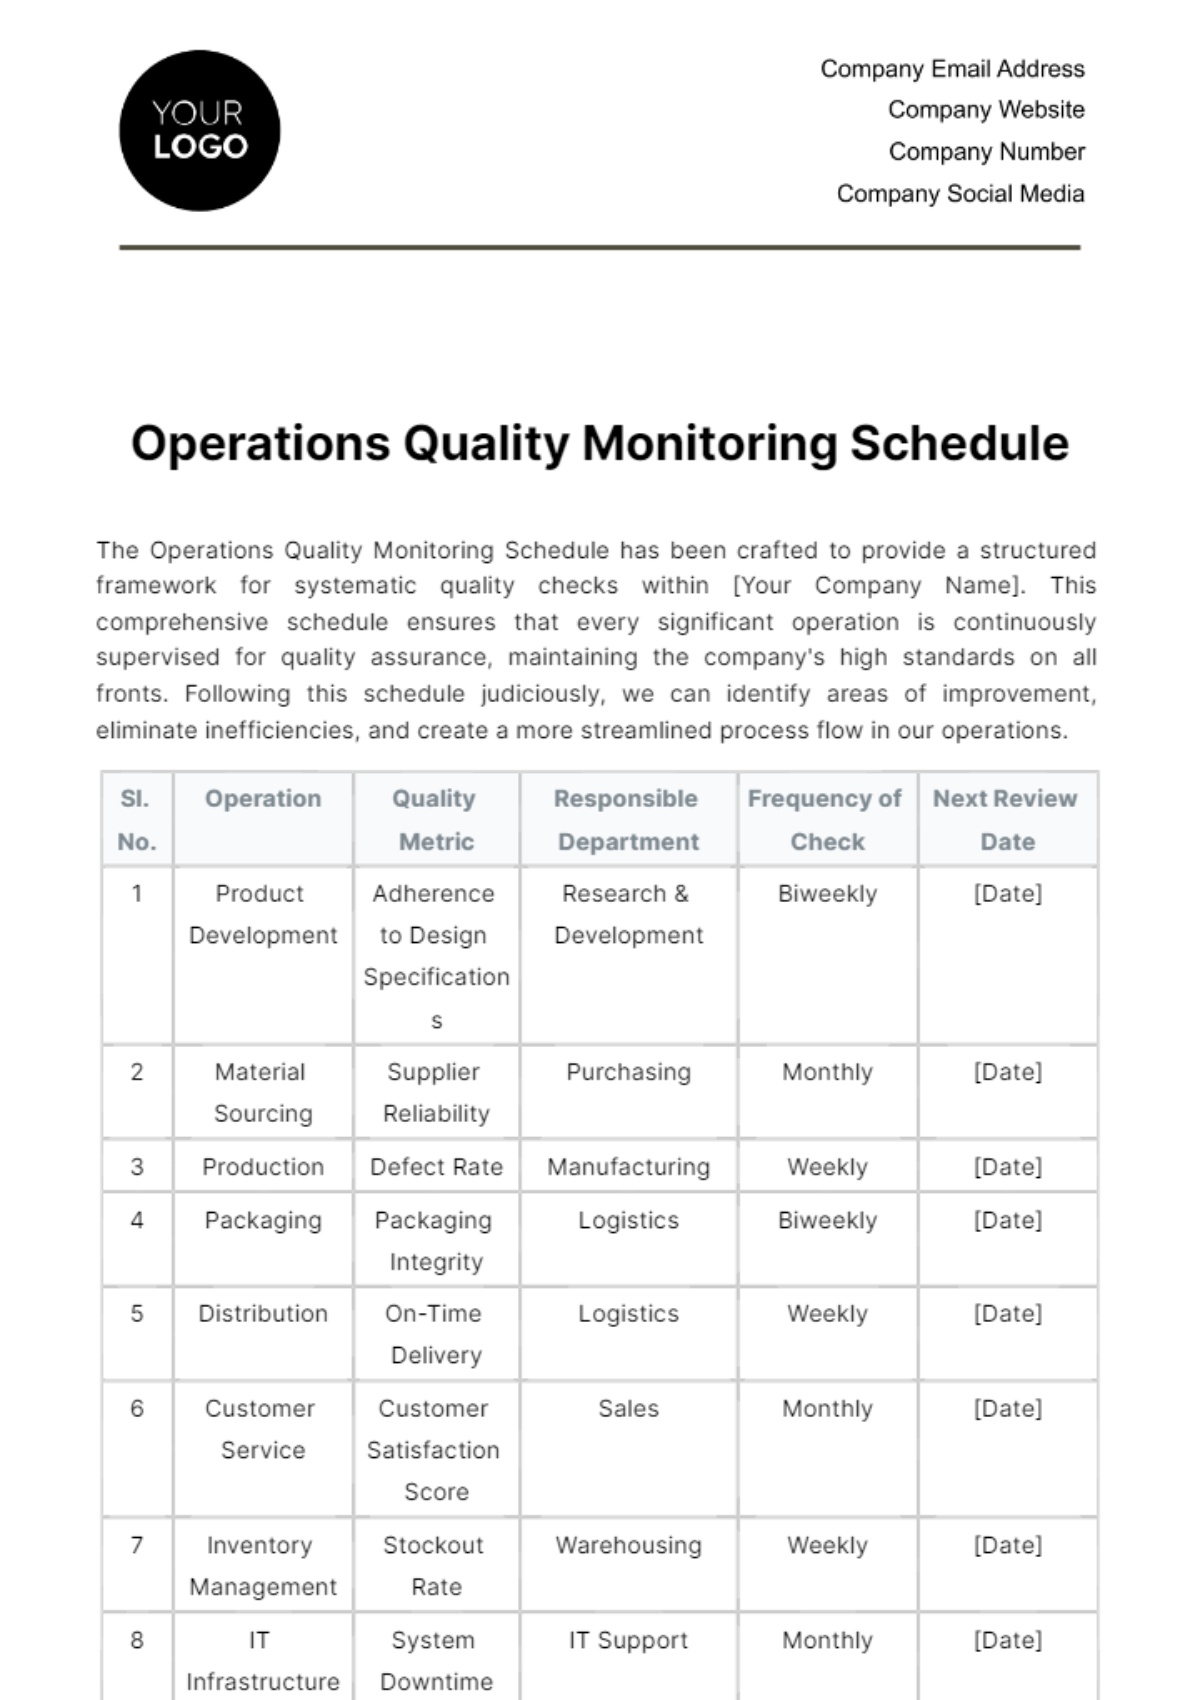 Operations Quality Monitoring Schedule Template